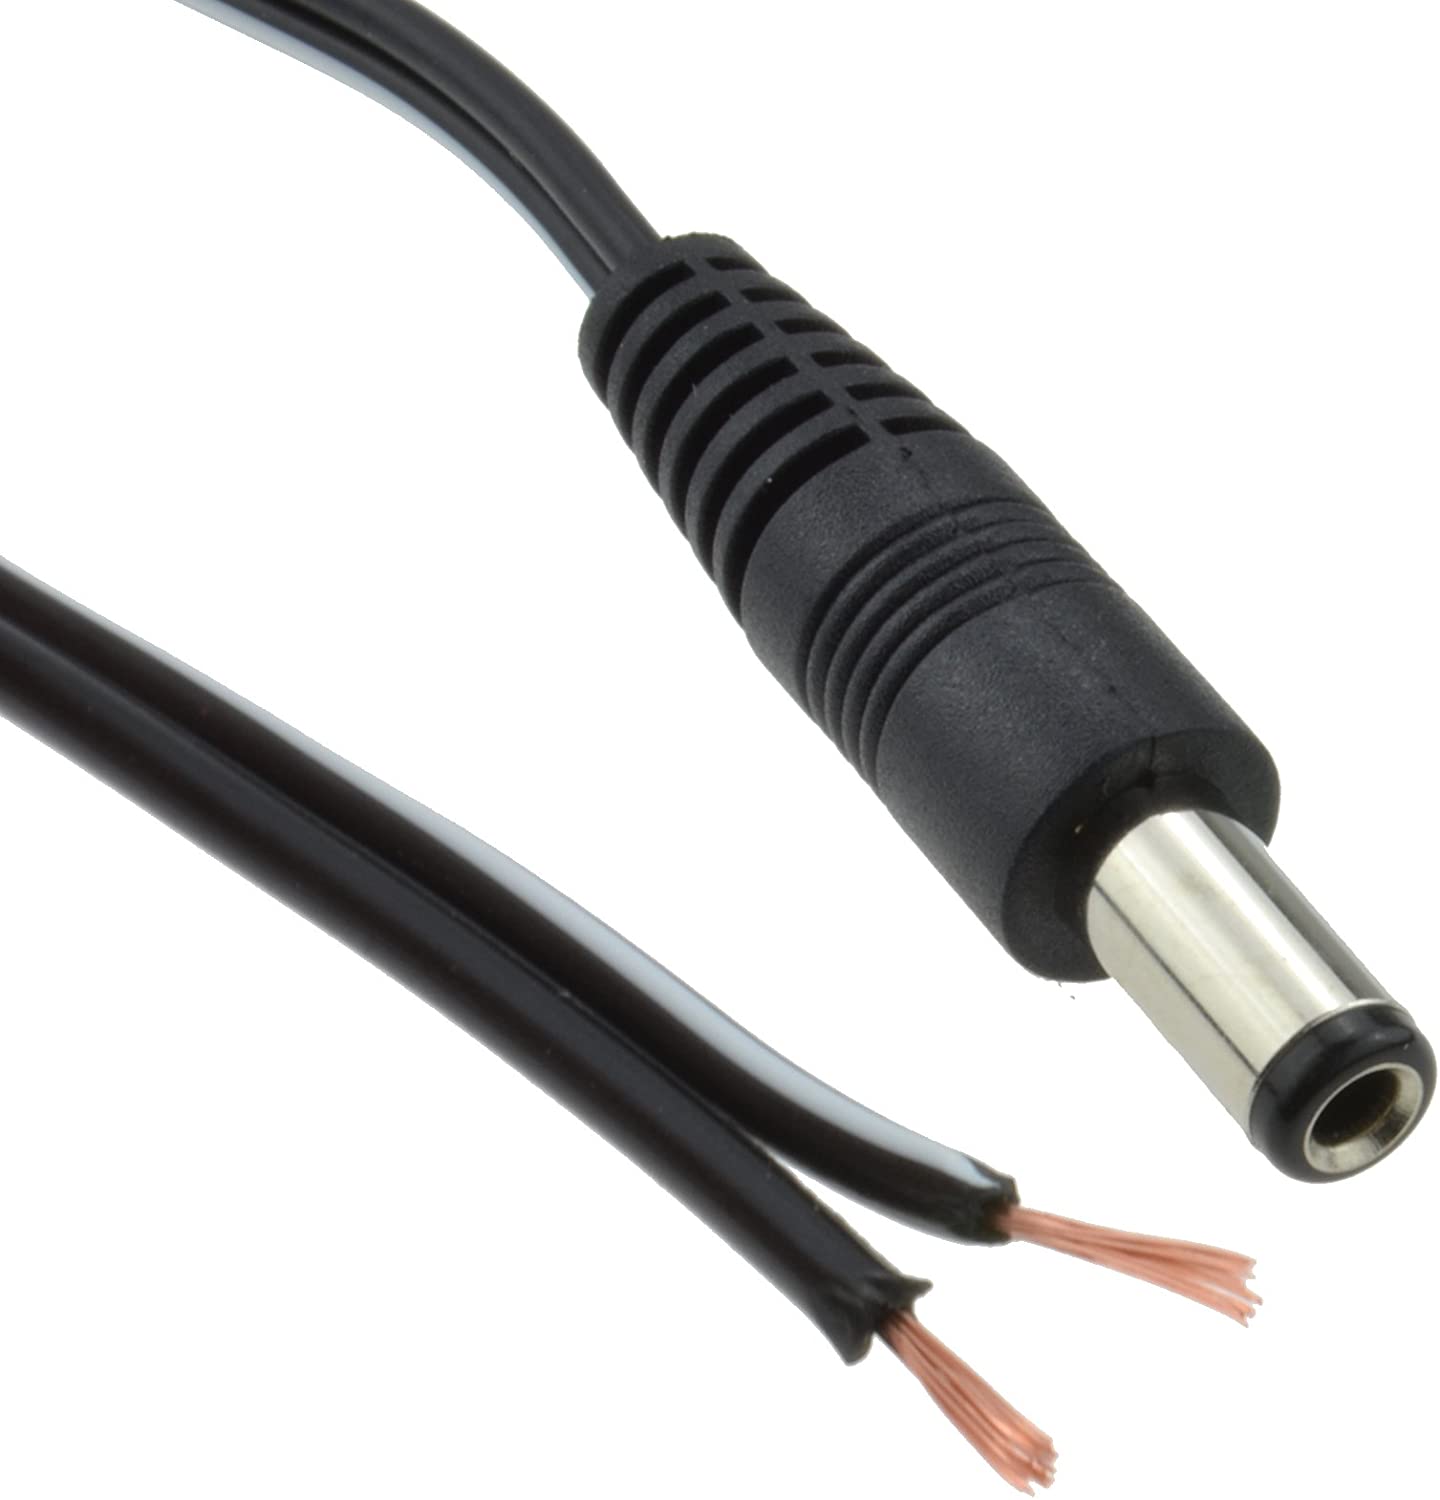 Cable DC Male 12V 5A - 5.5mm x 2.5mm DIDACTICO TUNISIE